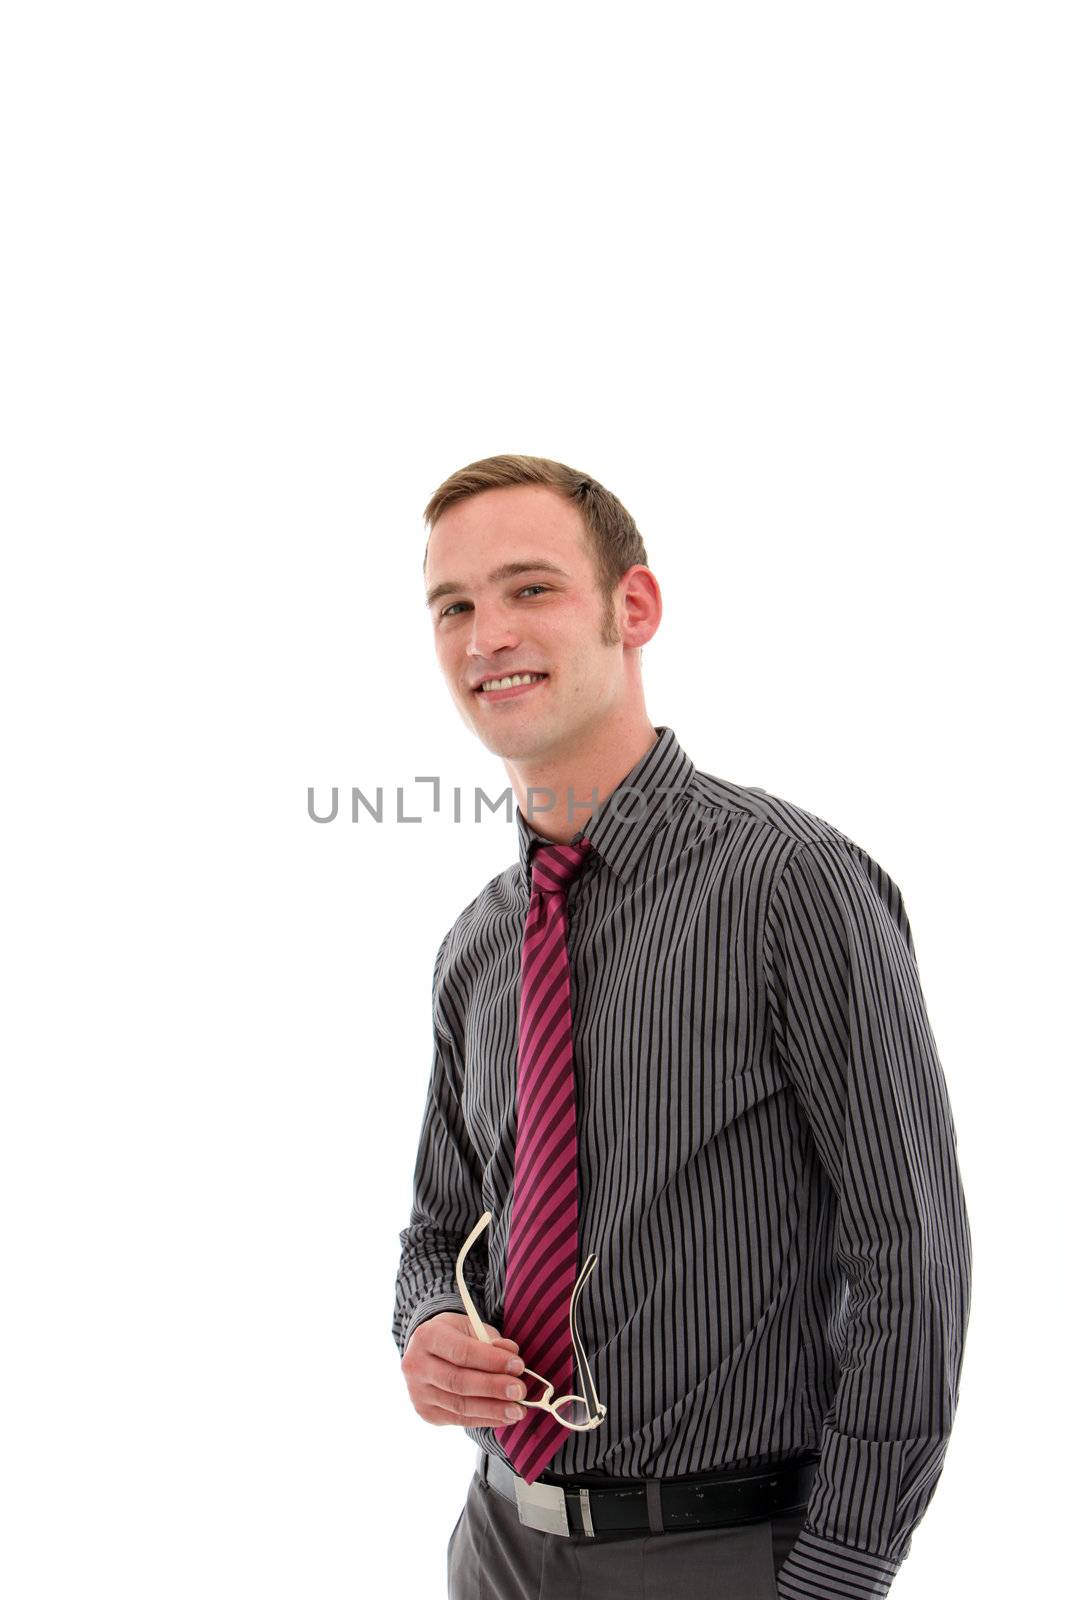 Observant young businessman standing watching and observing his surroundings before making a decision isolated studio portrait.